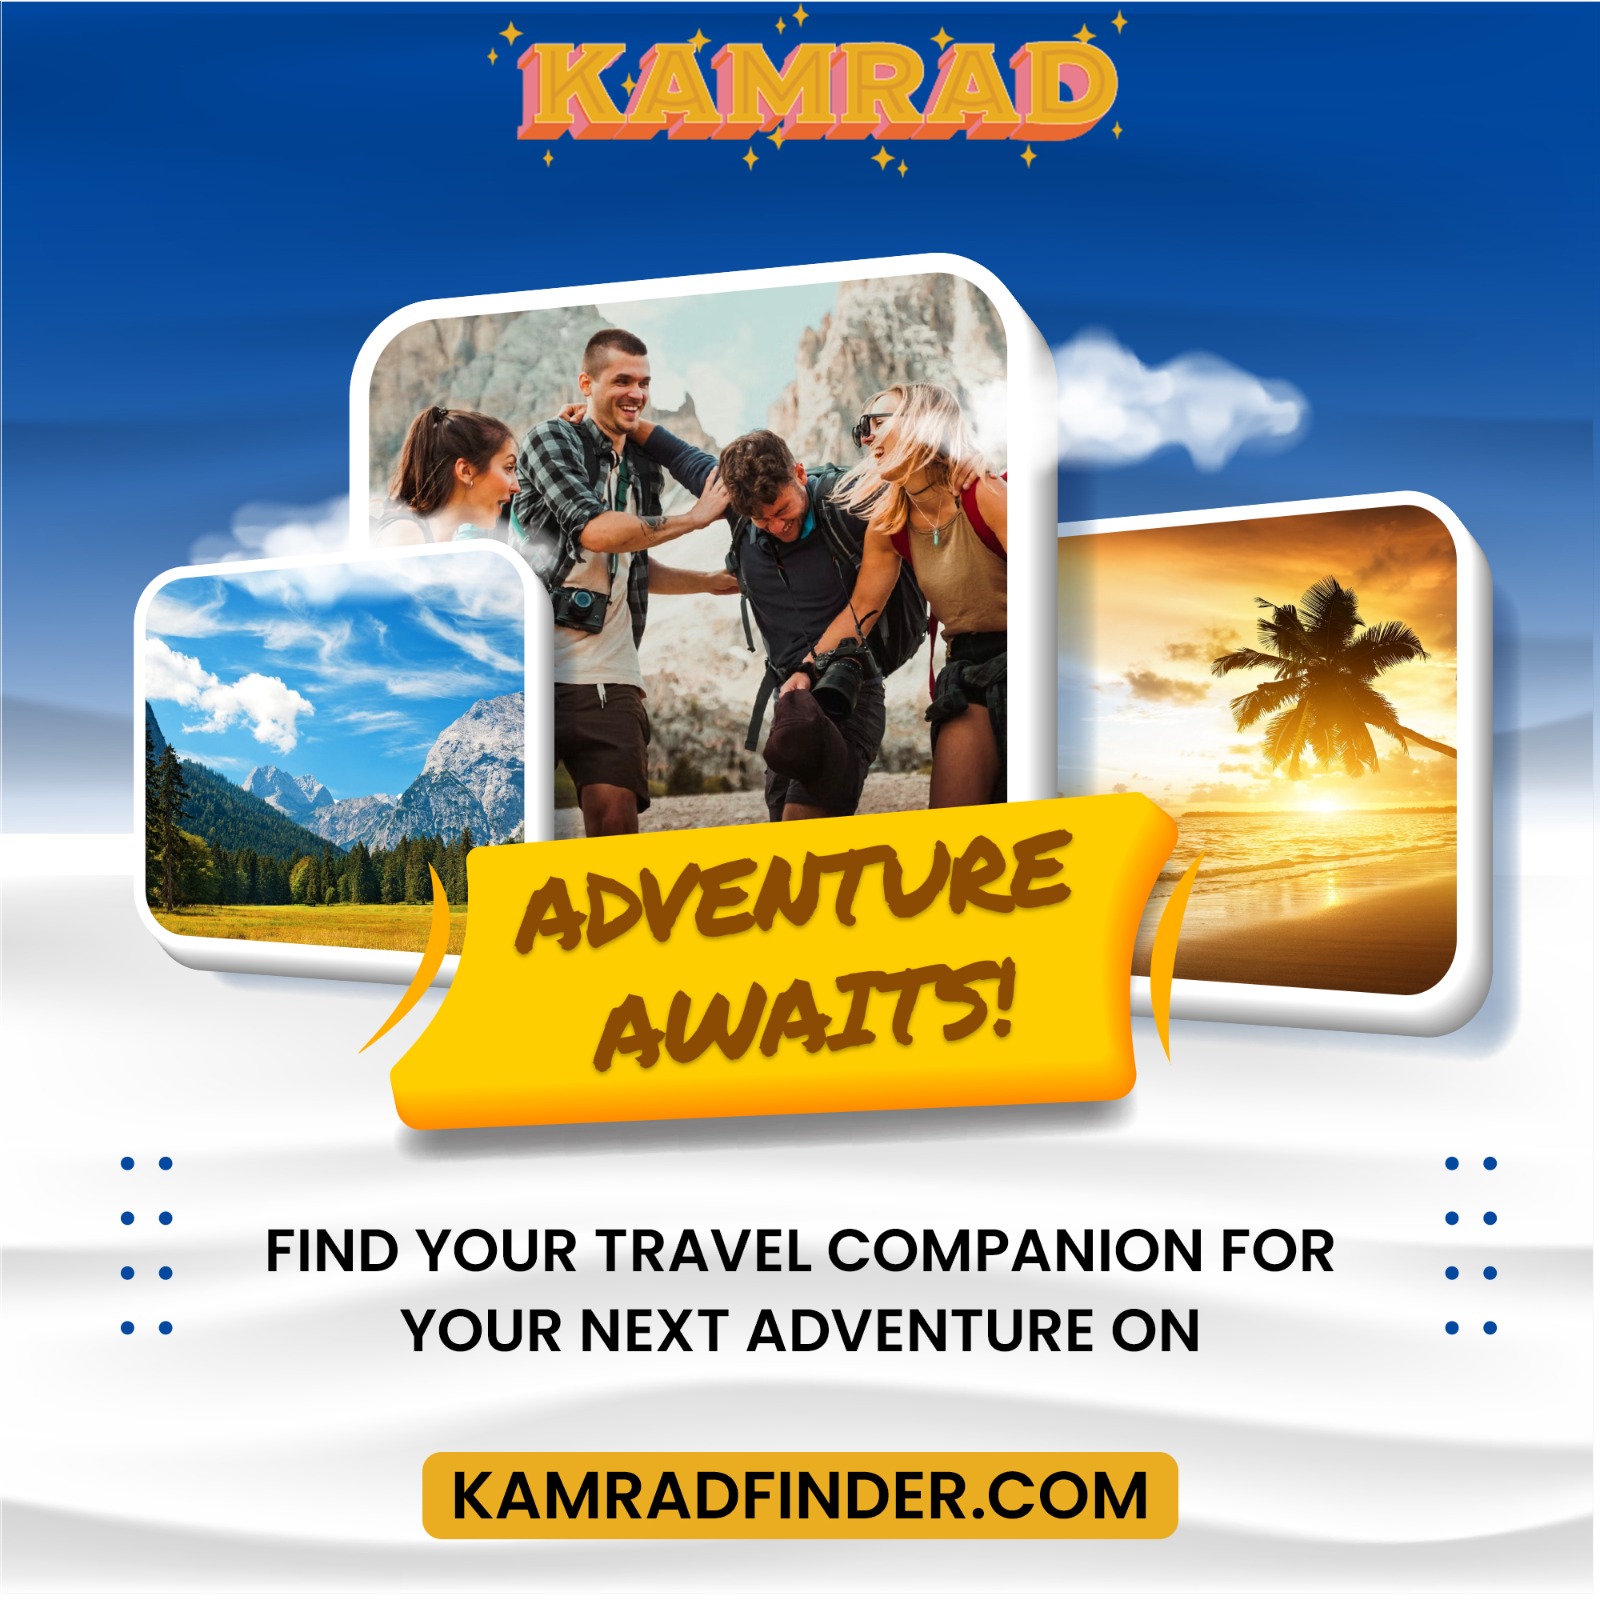  Travel Together with Best Companions and Explore the World Together